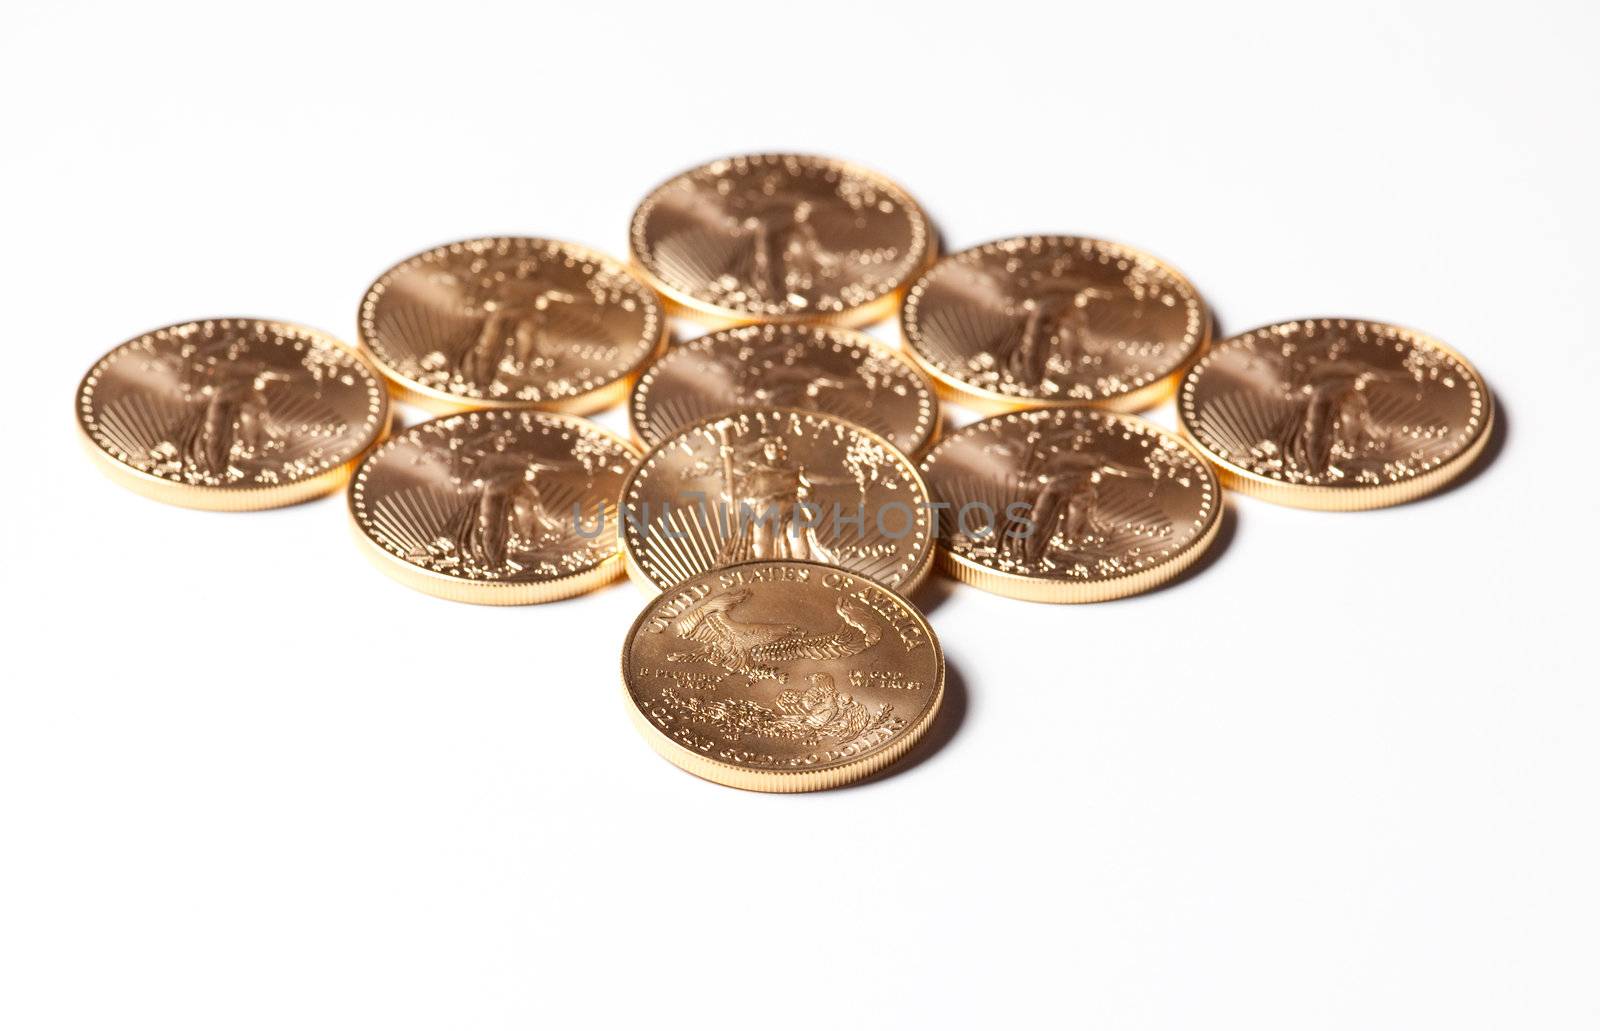 Solid gold eagle coins in the shape of a diamond